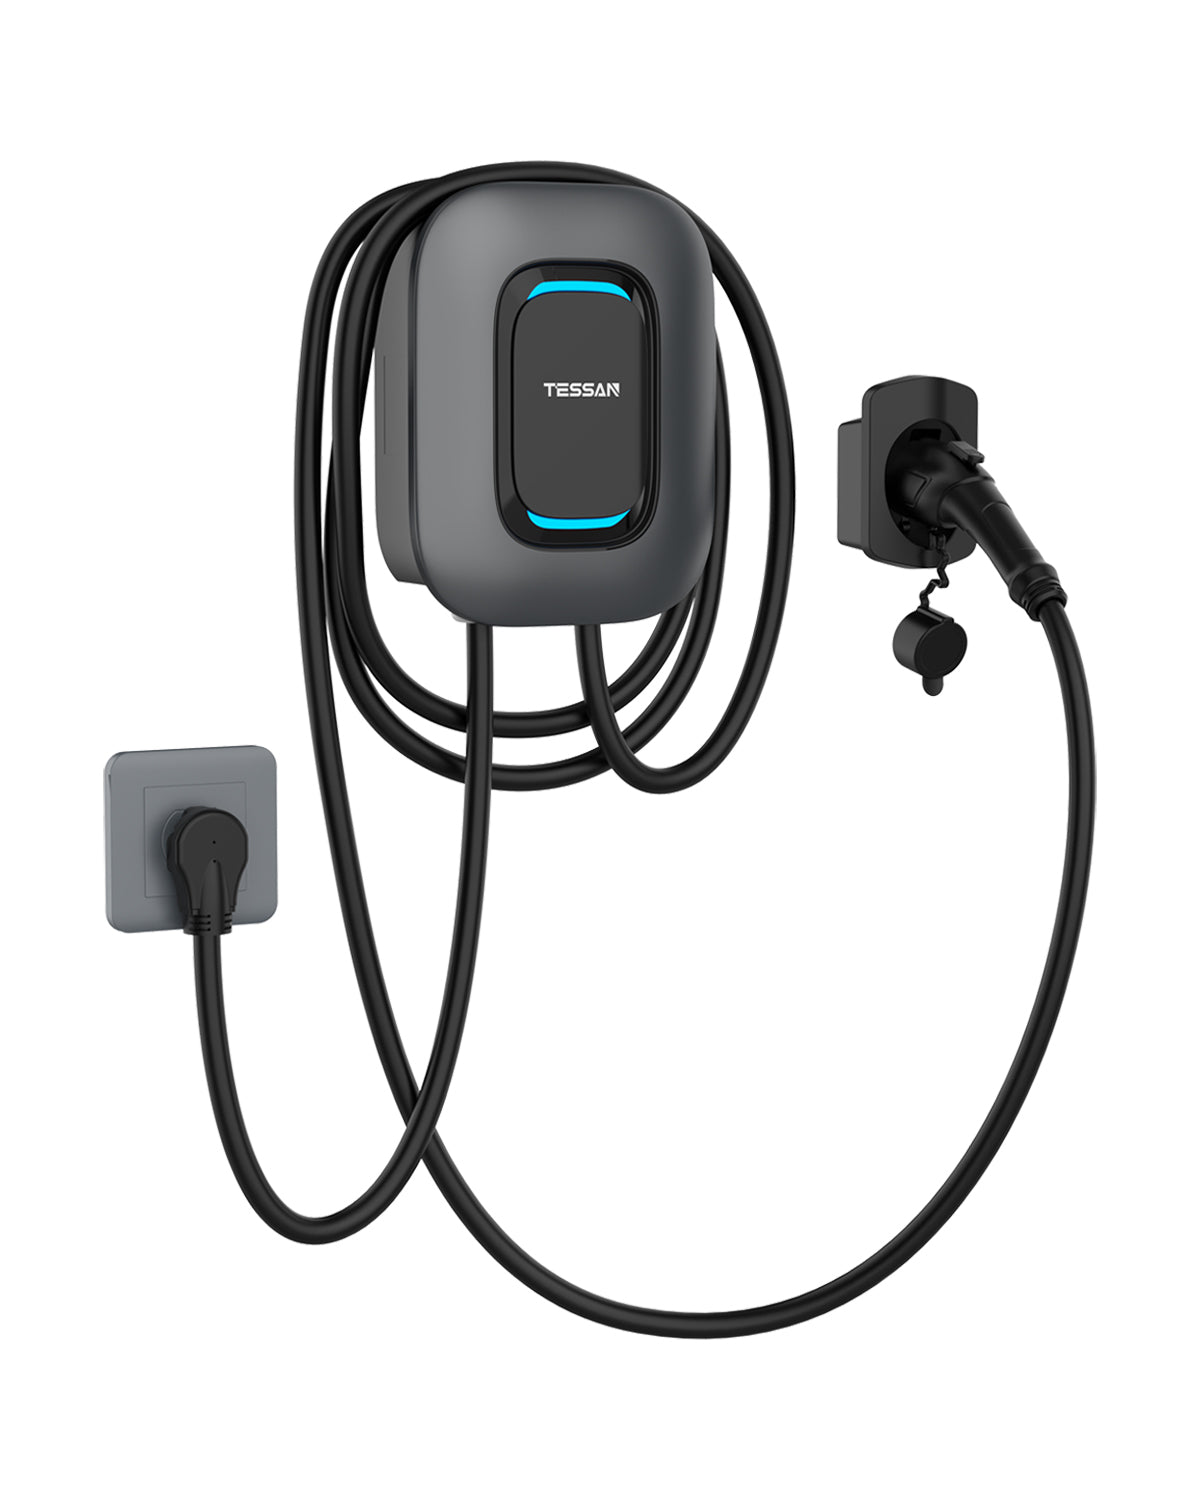 TESSAN 40A/ 240V Wall Mount Electric Vehicle Charging Station